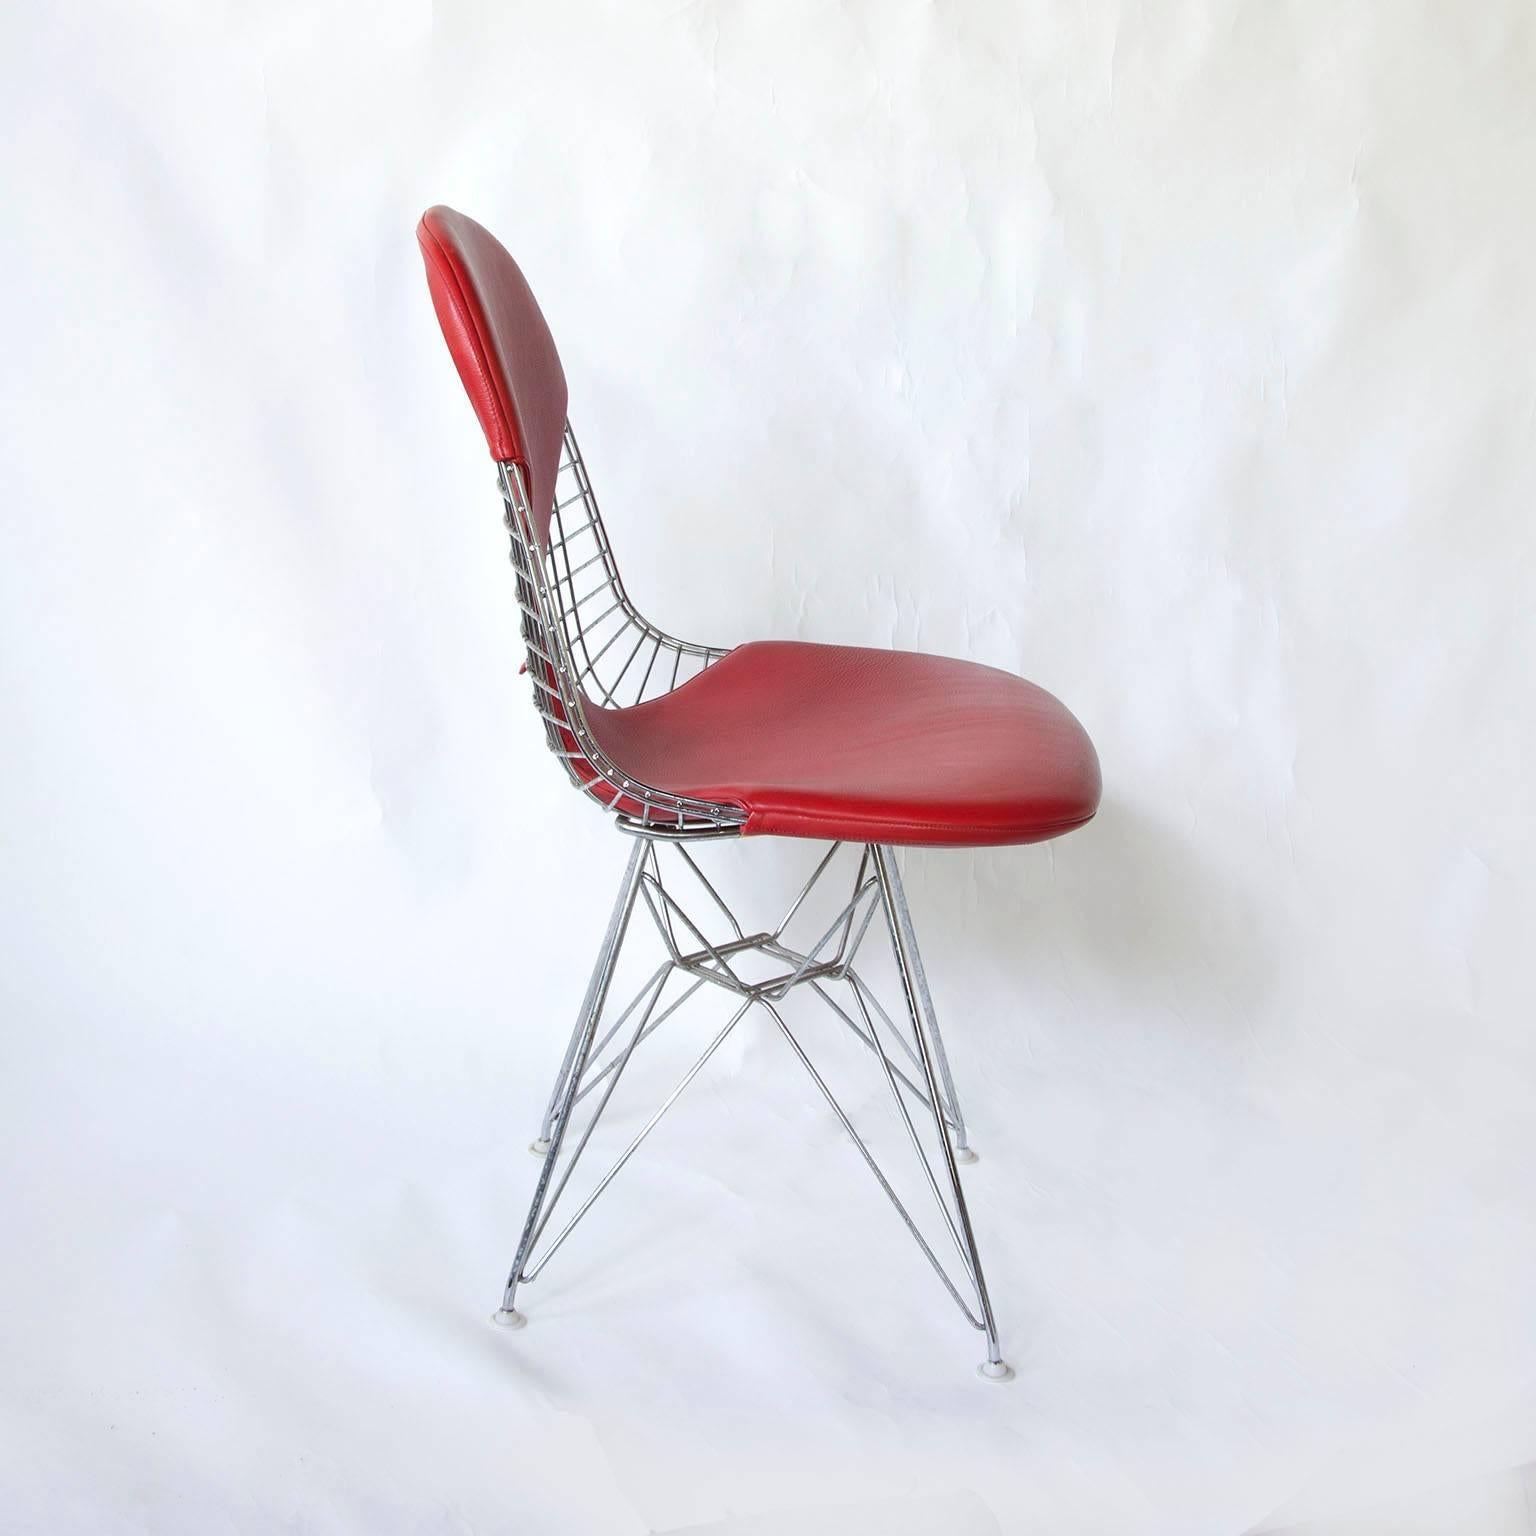 Mid-Century Modern 1950, Charles and Ray Eames, Set of Four DKR Chairs Red Leather Bikinis For Sale